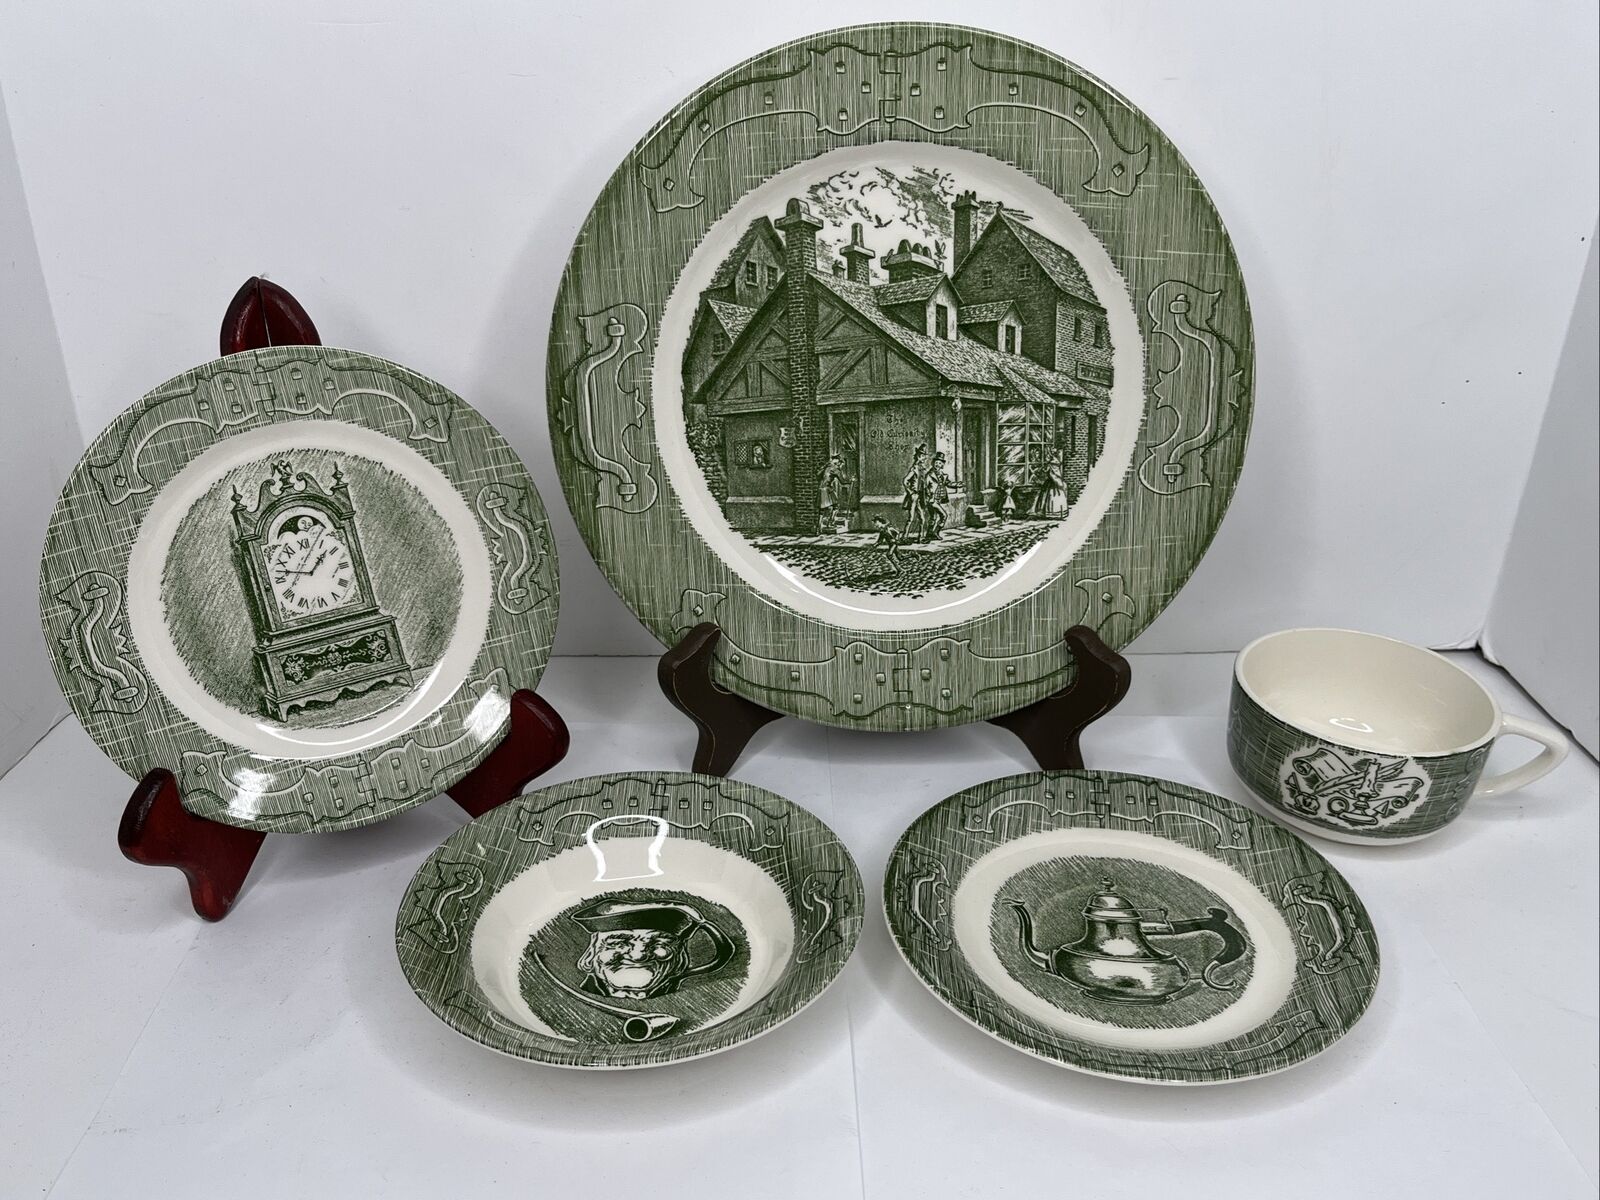 VTG 1950’s THE OLD CURIOSITY SHOP Green Dinnerware 5pc Place Setting Royal China